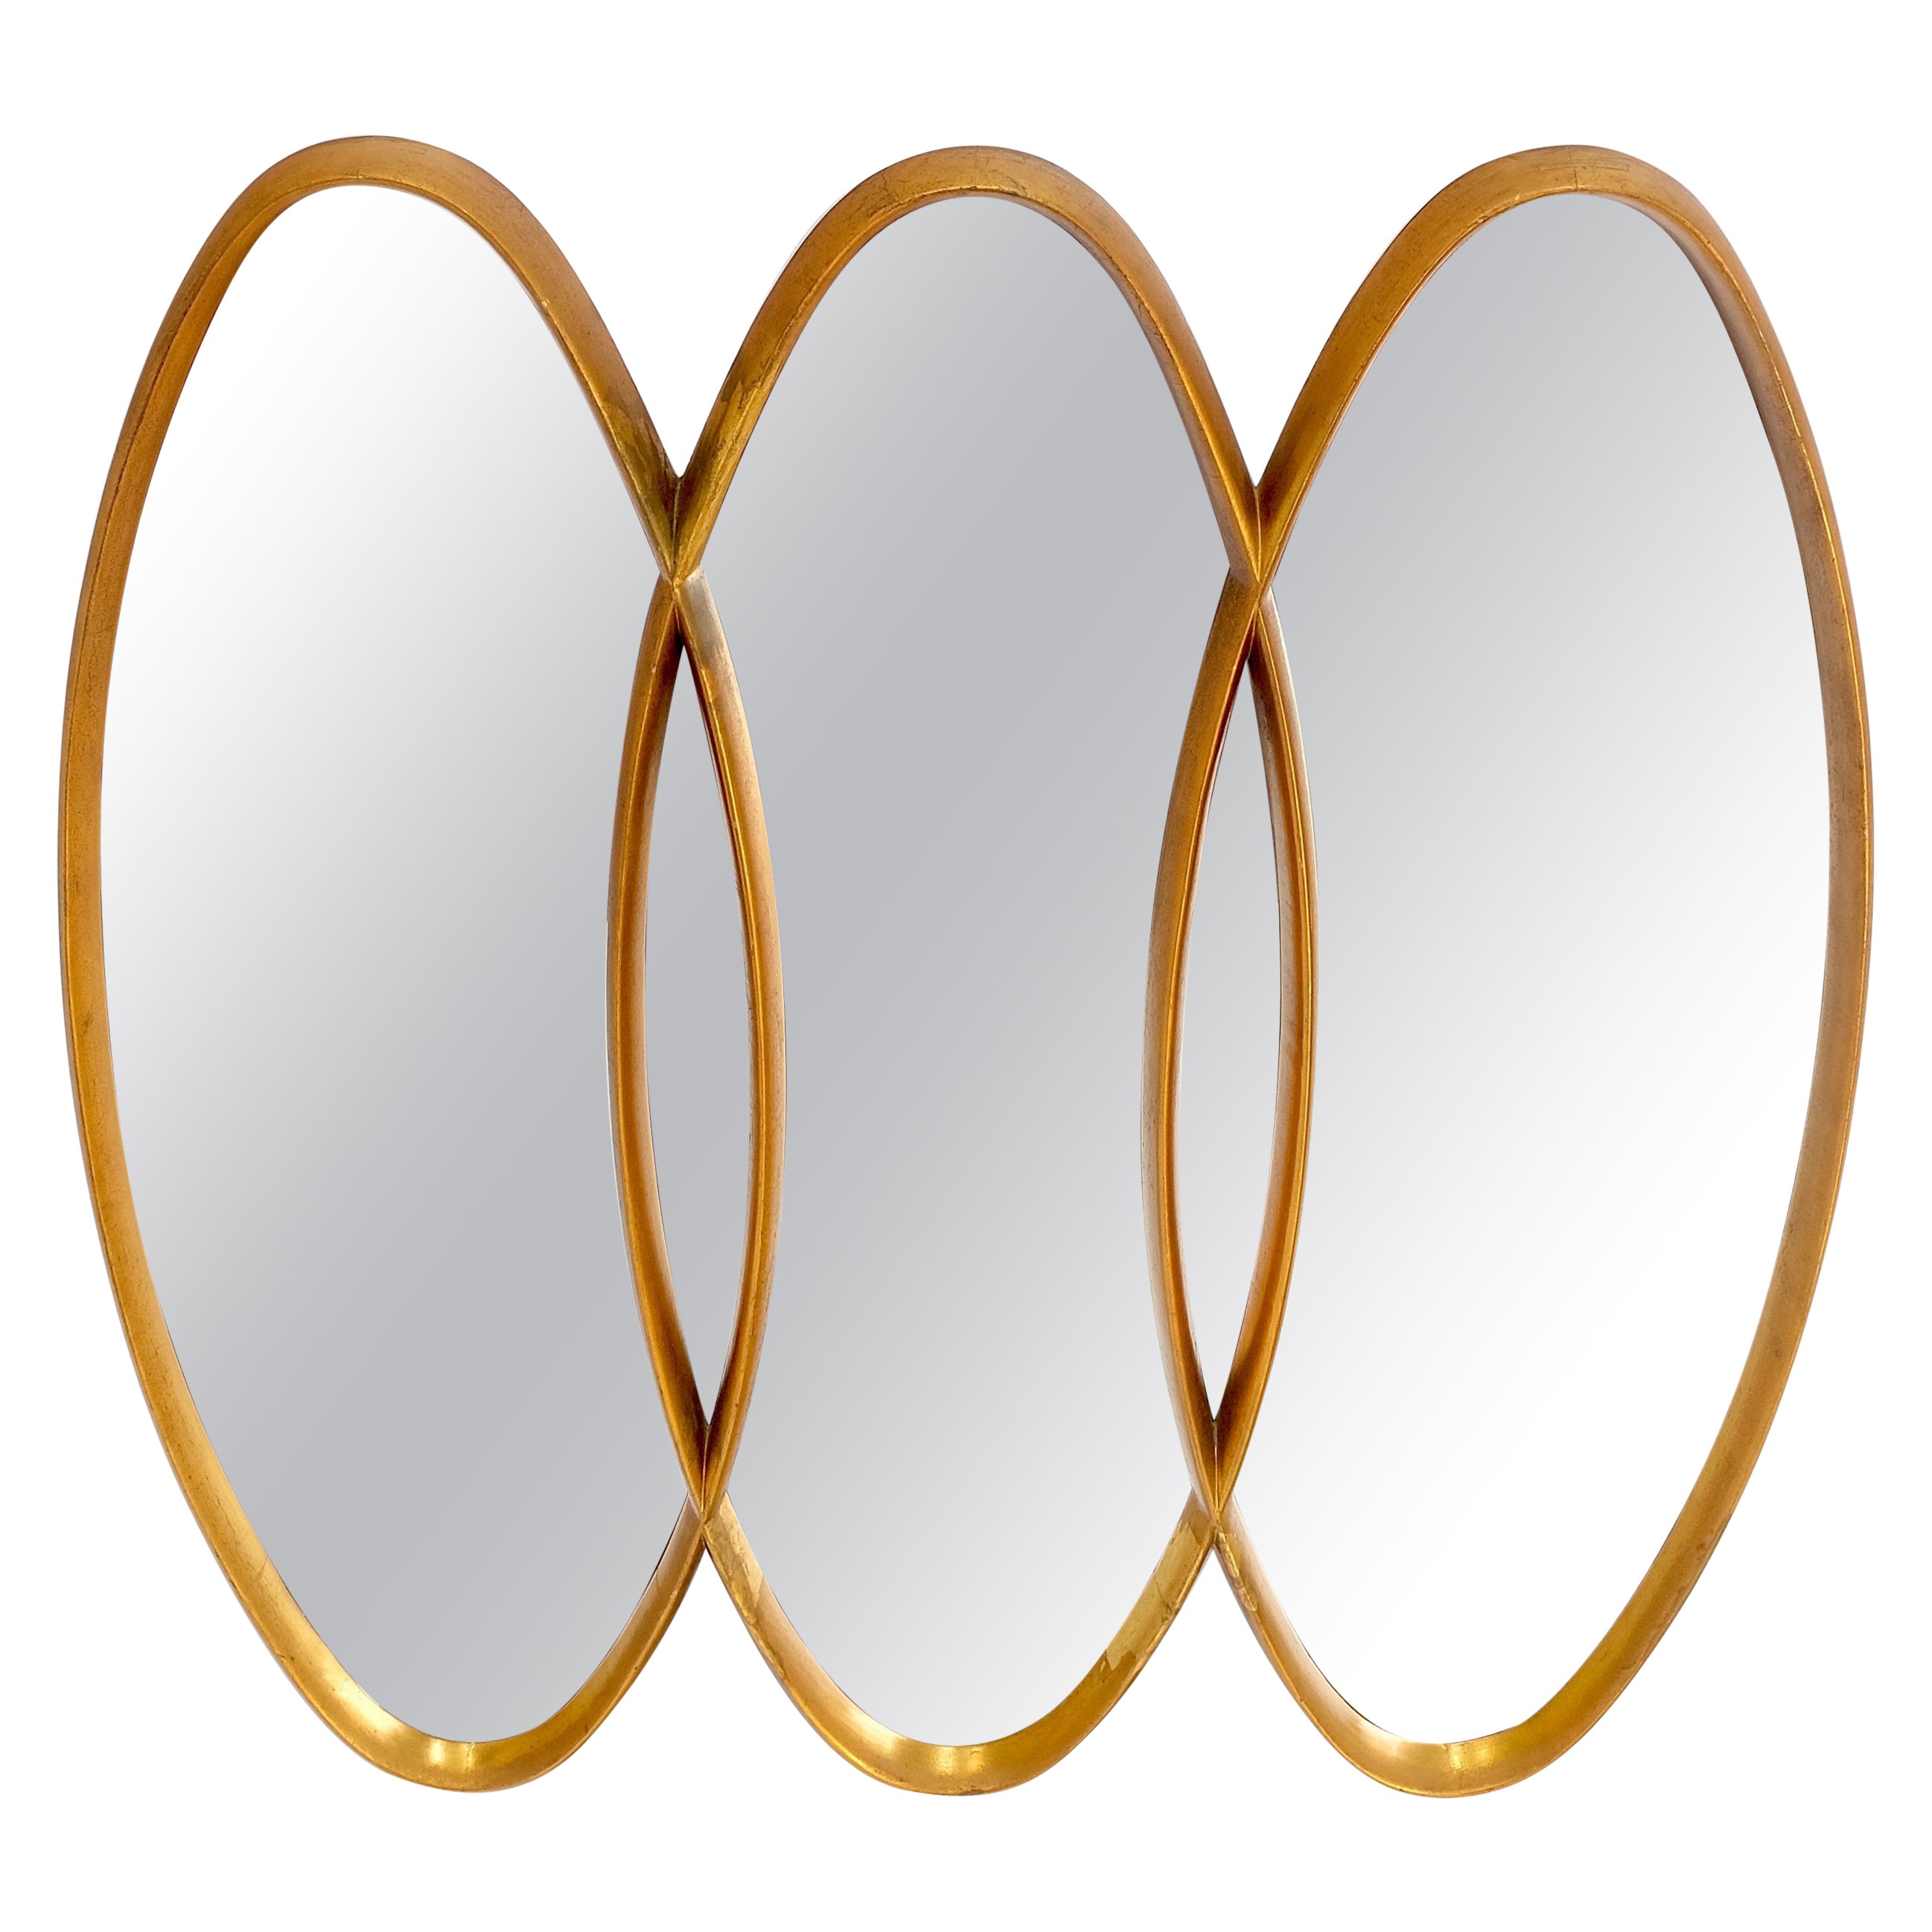 Mid-Century Modern Tripple Overlapping Carved Wood Ovals Gold Gilt Wall Mirror For Sale